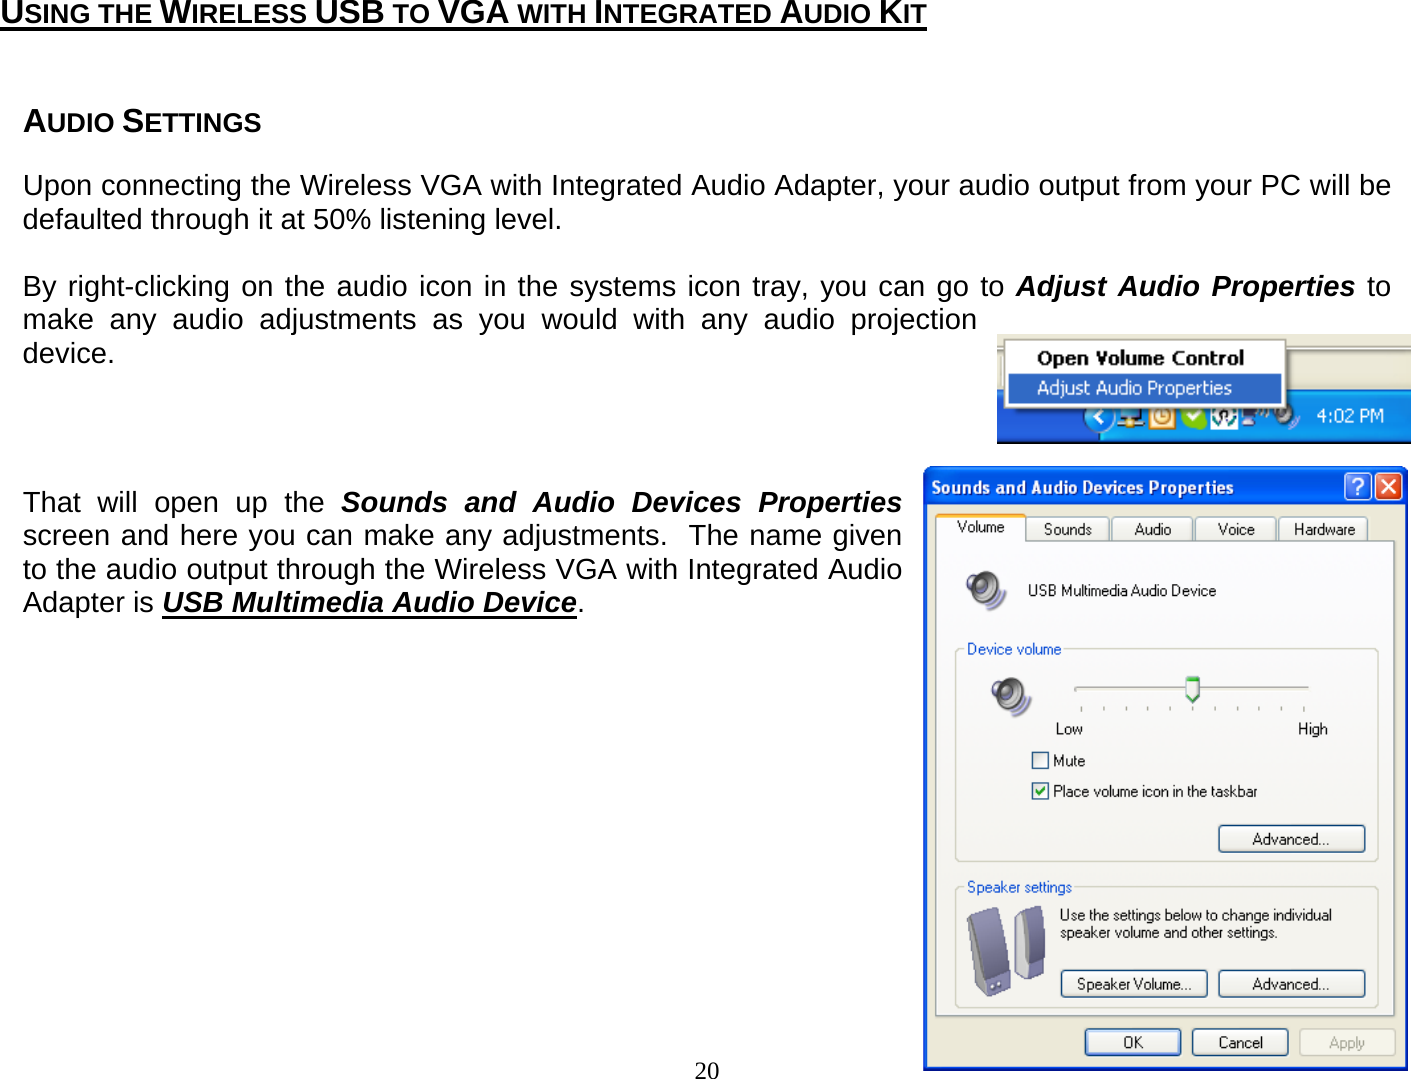 20  AUDIO SETTINGS  Upon connecting the Wireless VGA with Integrated Audio Adapter, your audio output from your PC will be defaulted through it at 50% listening level.    By right-clicking on the audio icon in the systems icon tray, you can go to Adjust Audio Properties to make any audio adjustments as you would with any audio projection device.       That will open up the Sounds and Audio Devices Properties screen and here you can make any adjustments.  The name given to the audio output through the Wireless VGA with Integrated Audio Adapter is USB Multimedia Audio Device.                USING THE WIRELESS USB TO VGA WITH INTEGRATED AUDIO KIT 